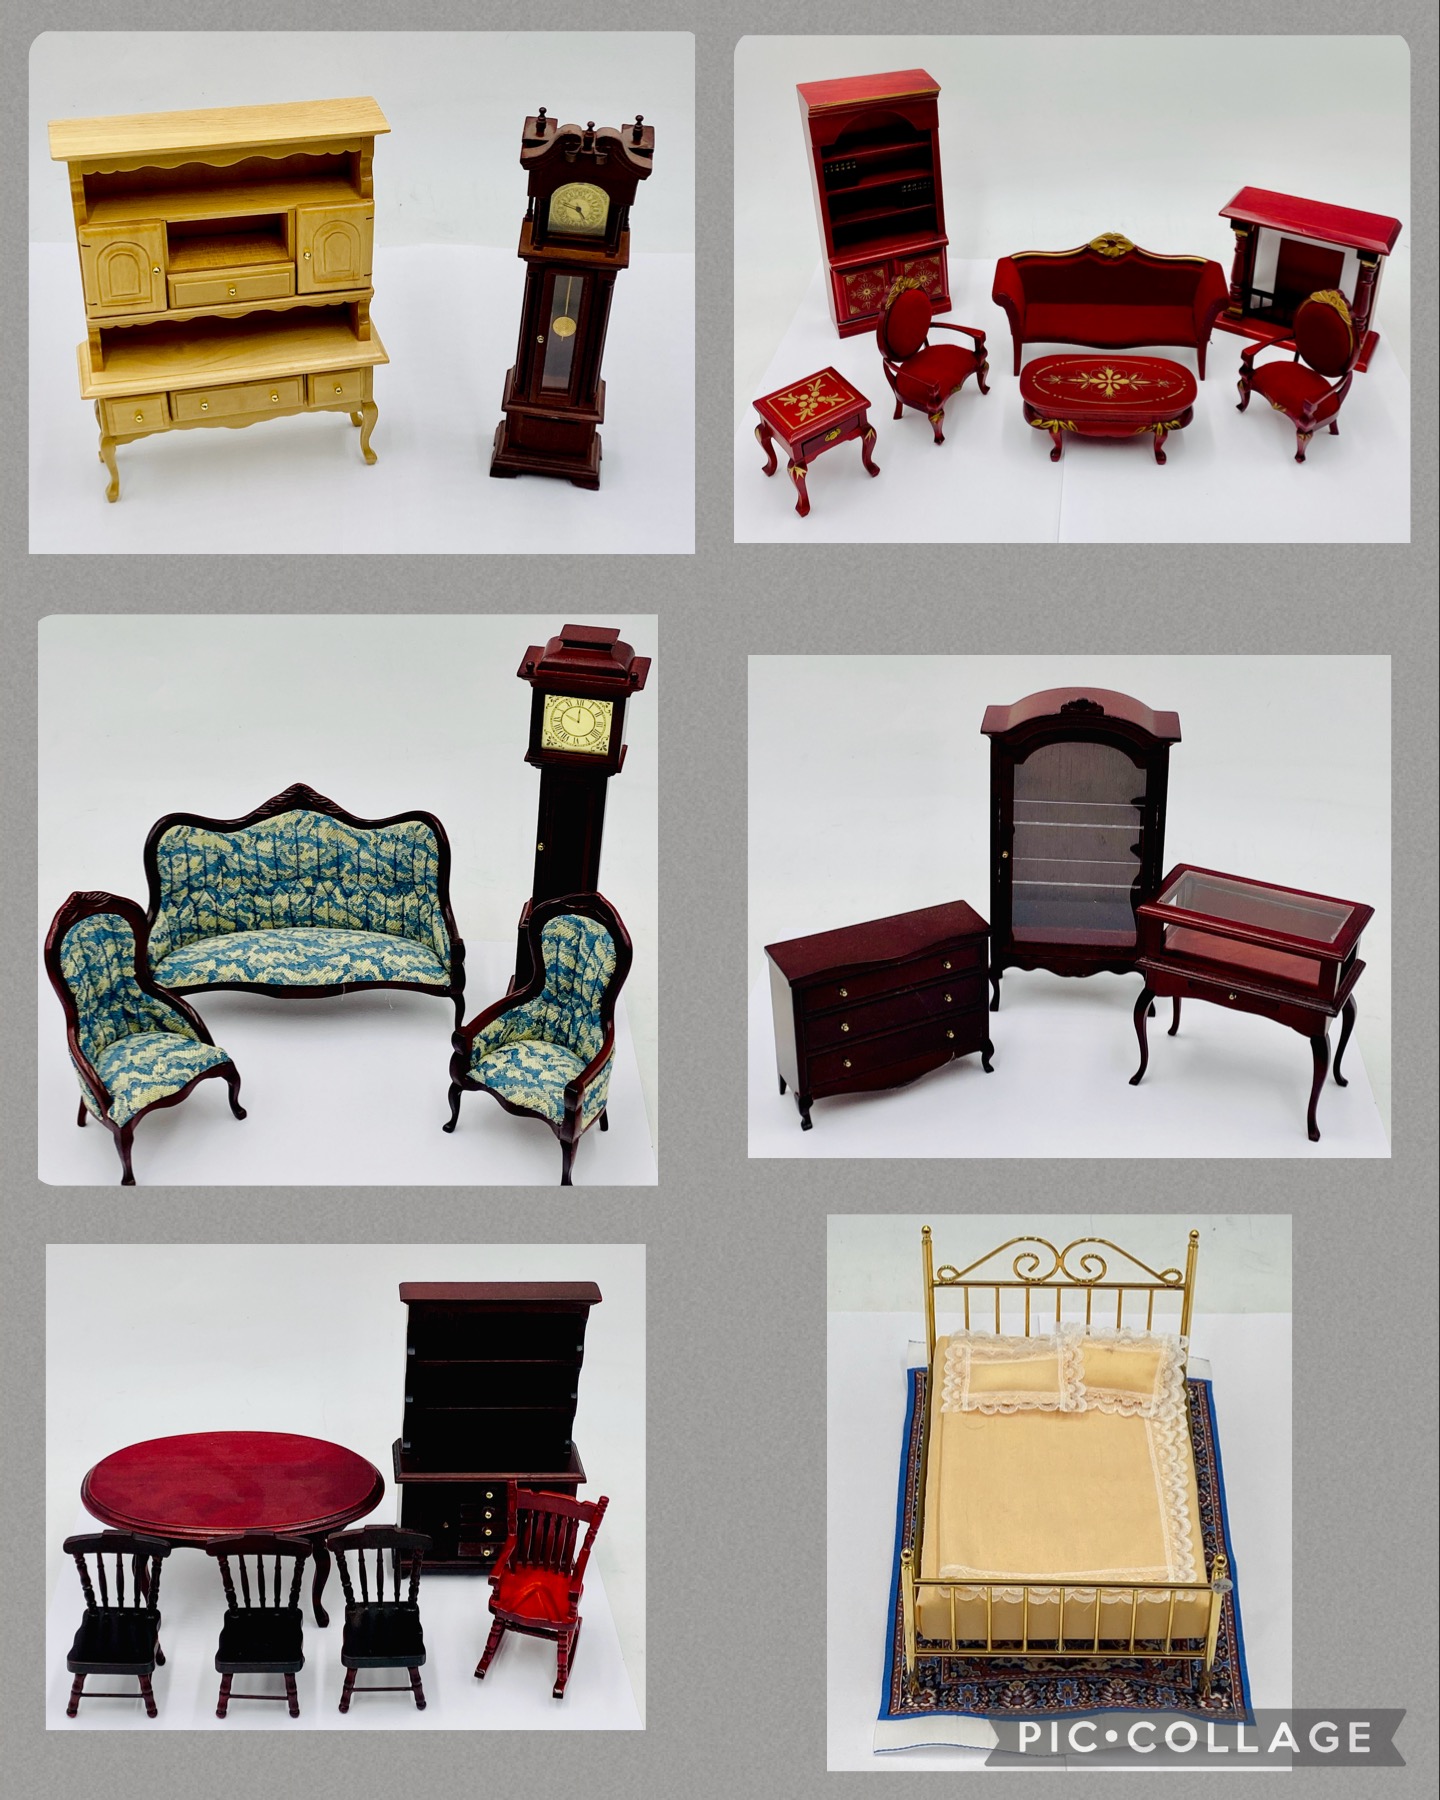 A collection of dolls house furniture (mainly mahogany style) including grandfather clock, dining